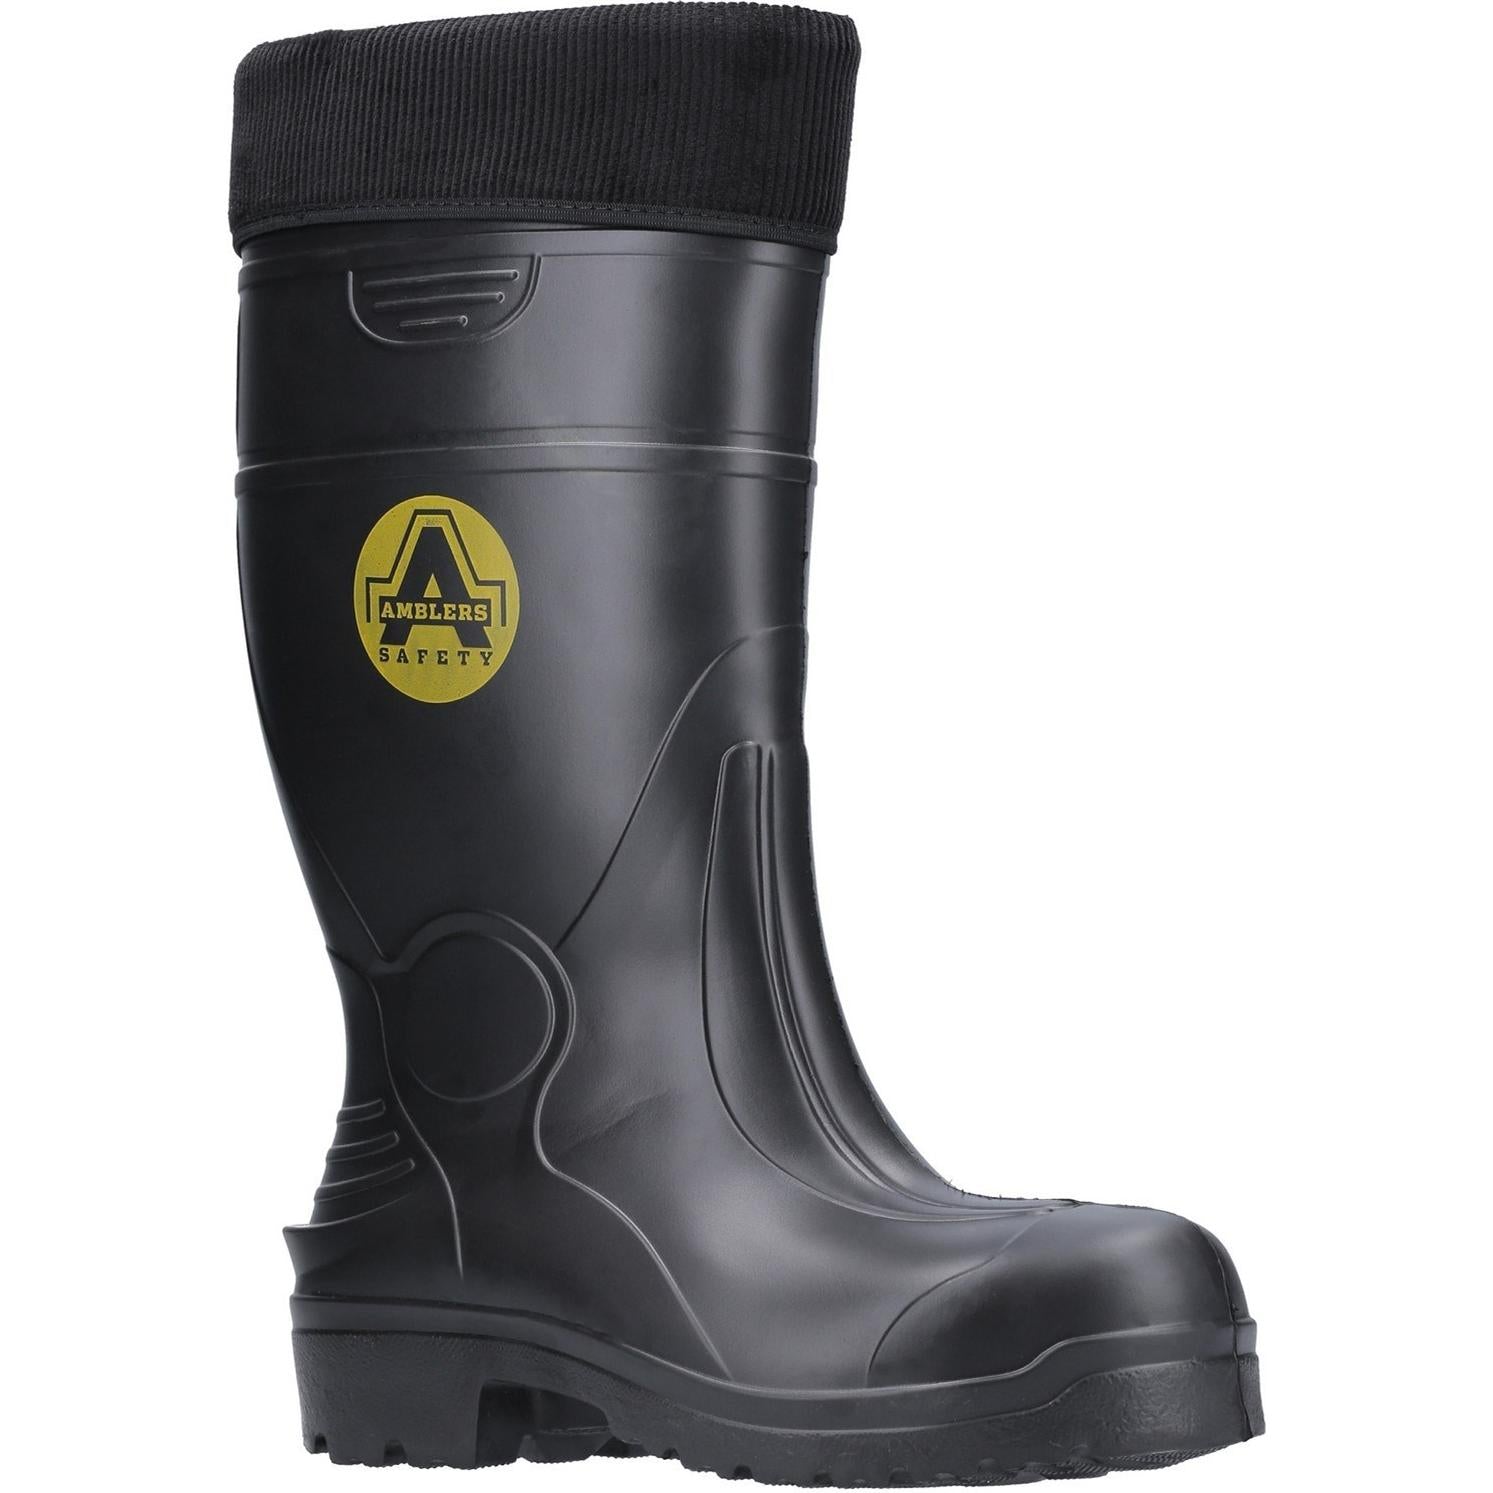 Amblers Safety Safety EVA Boots